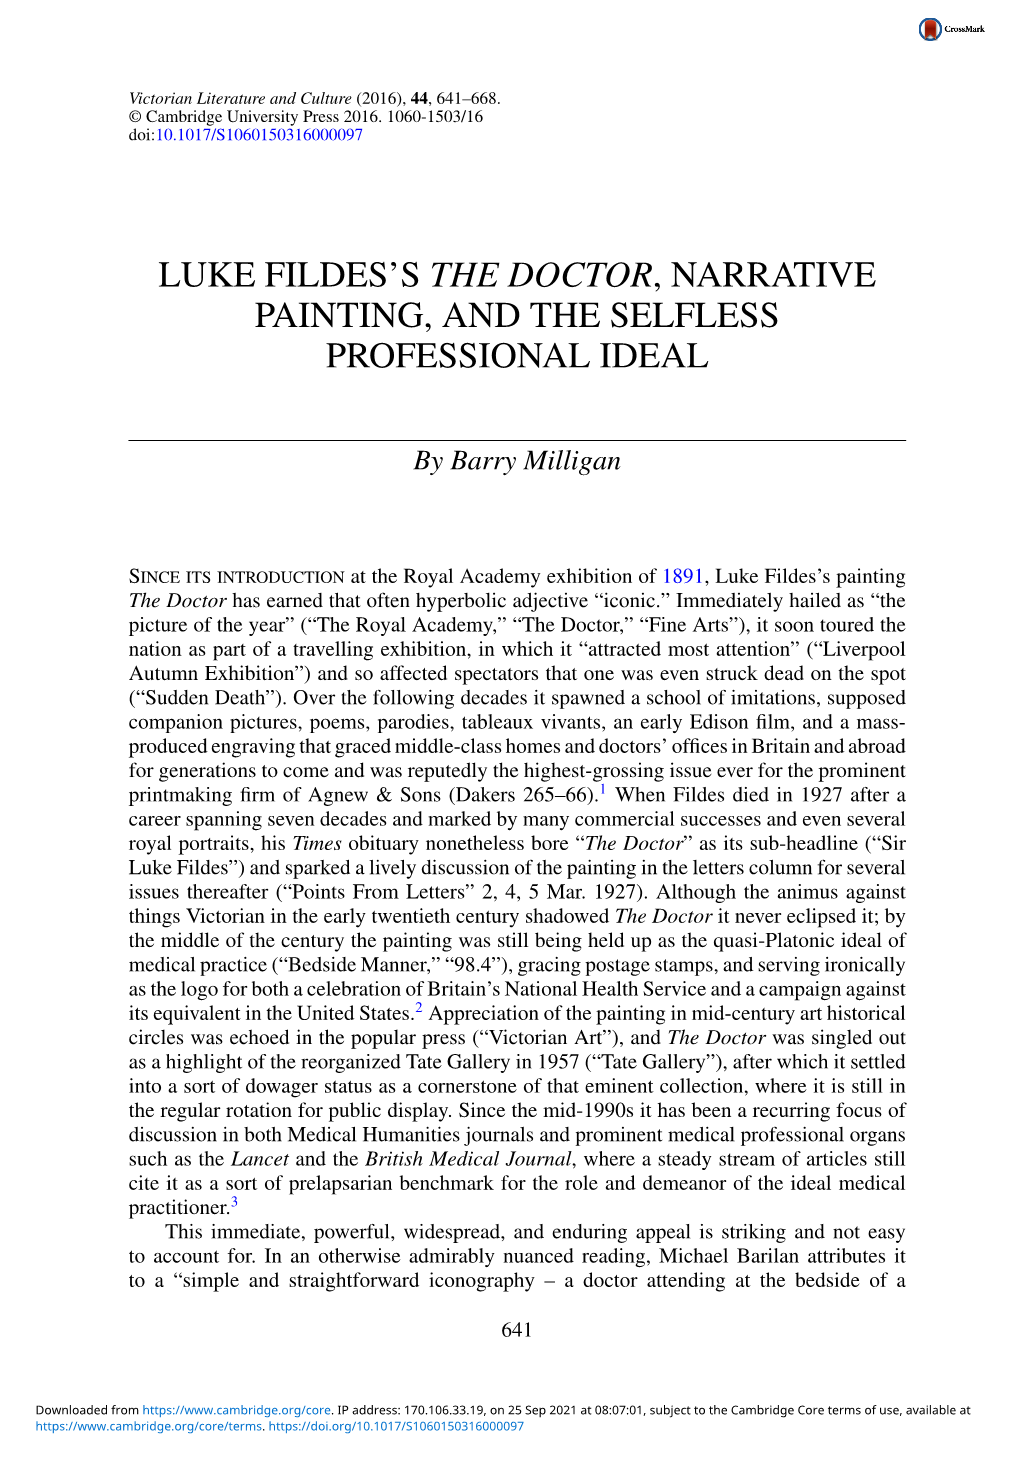 Luke Fildes's the Doctor, Narrative Painting, and The